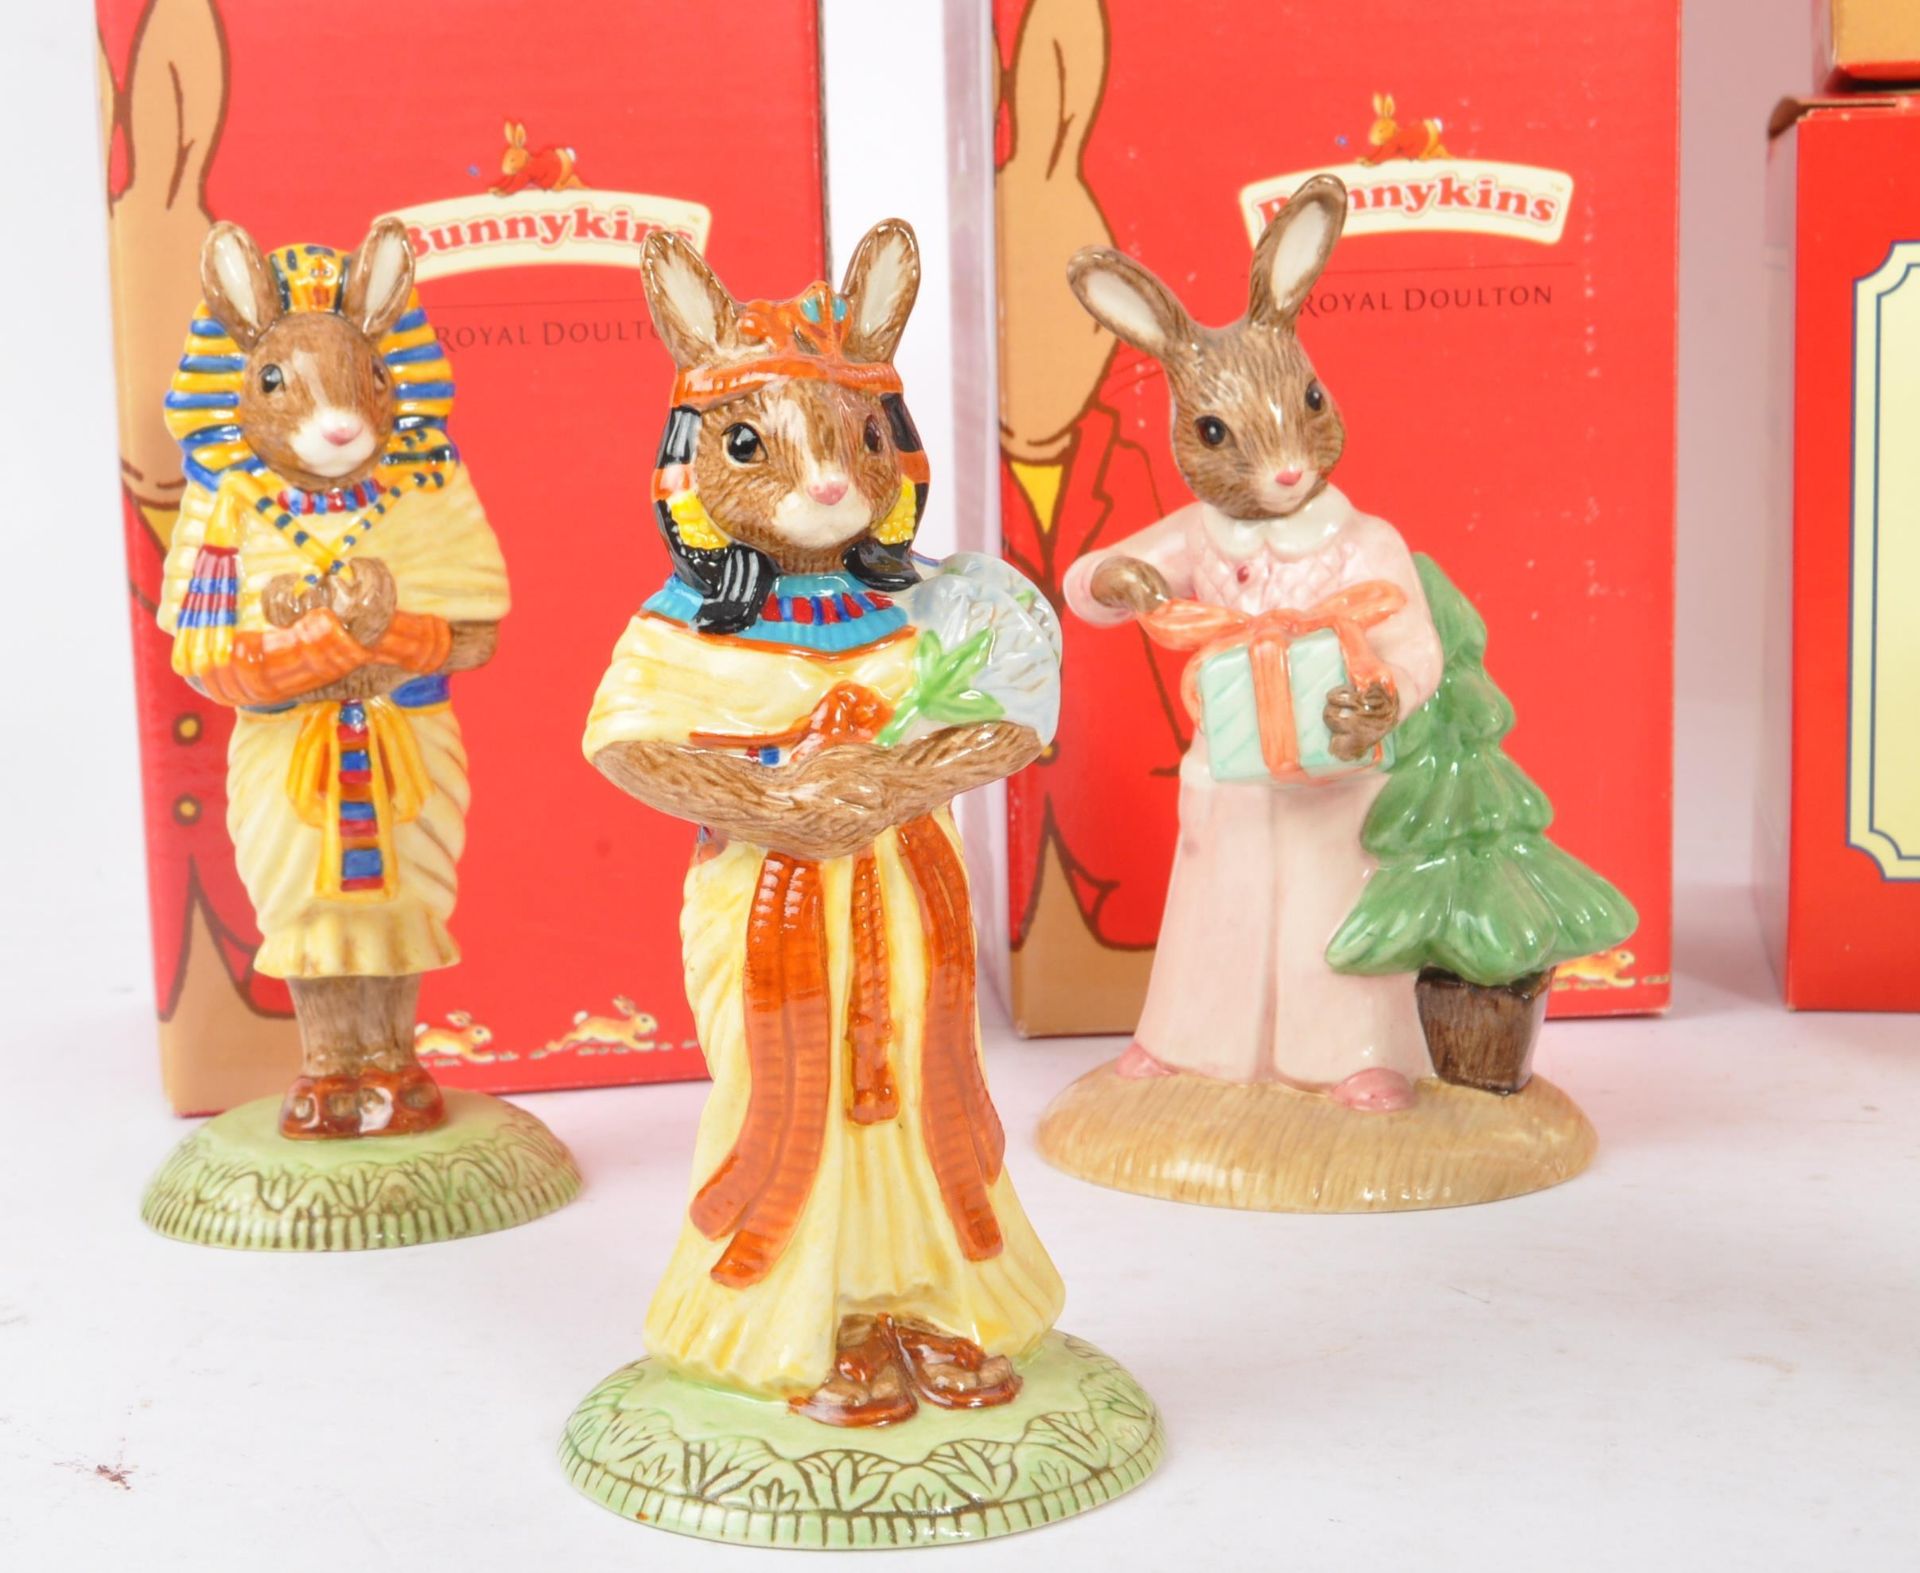 ROYAL DOULTON - BUNNYKINS - COLLECTION OF PORCELAIN FIGURES - Image 4 of 5